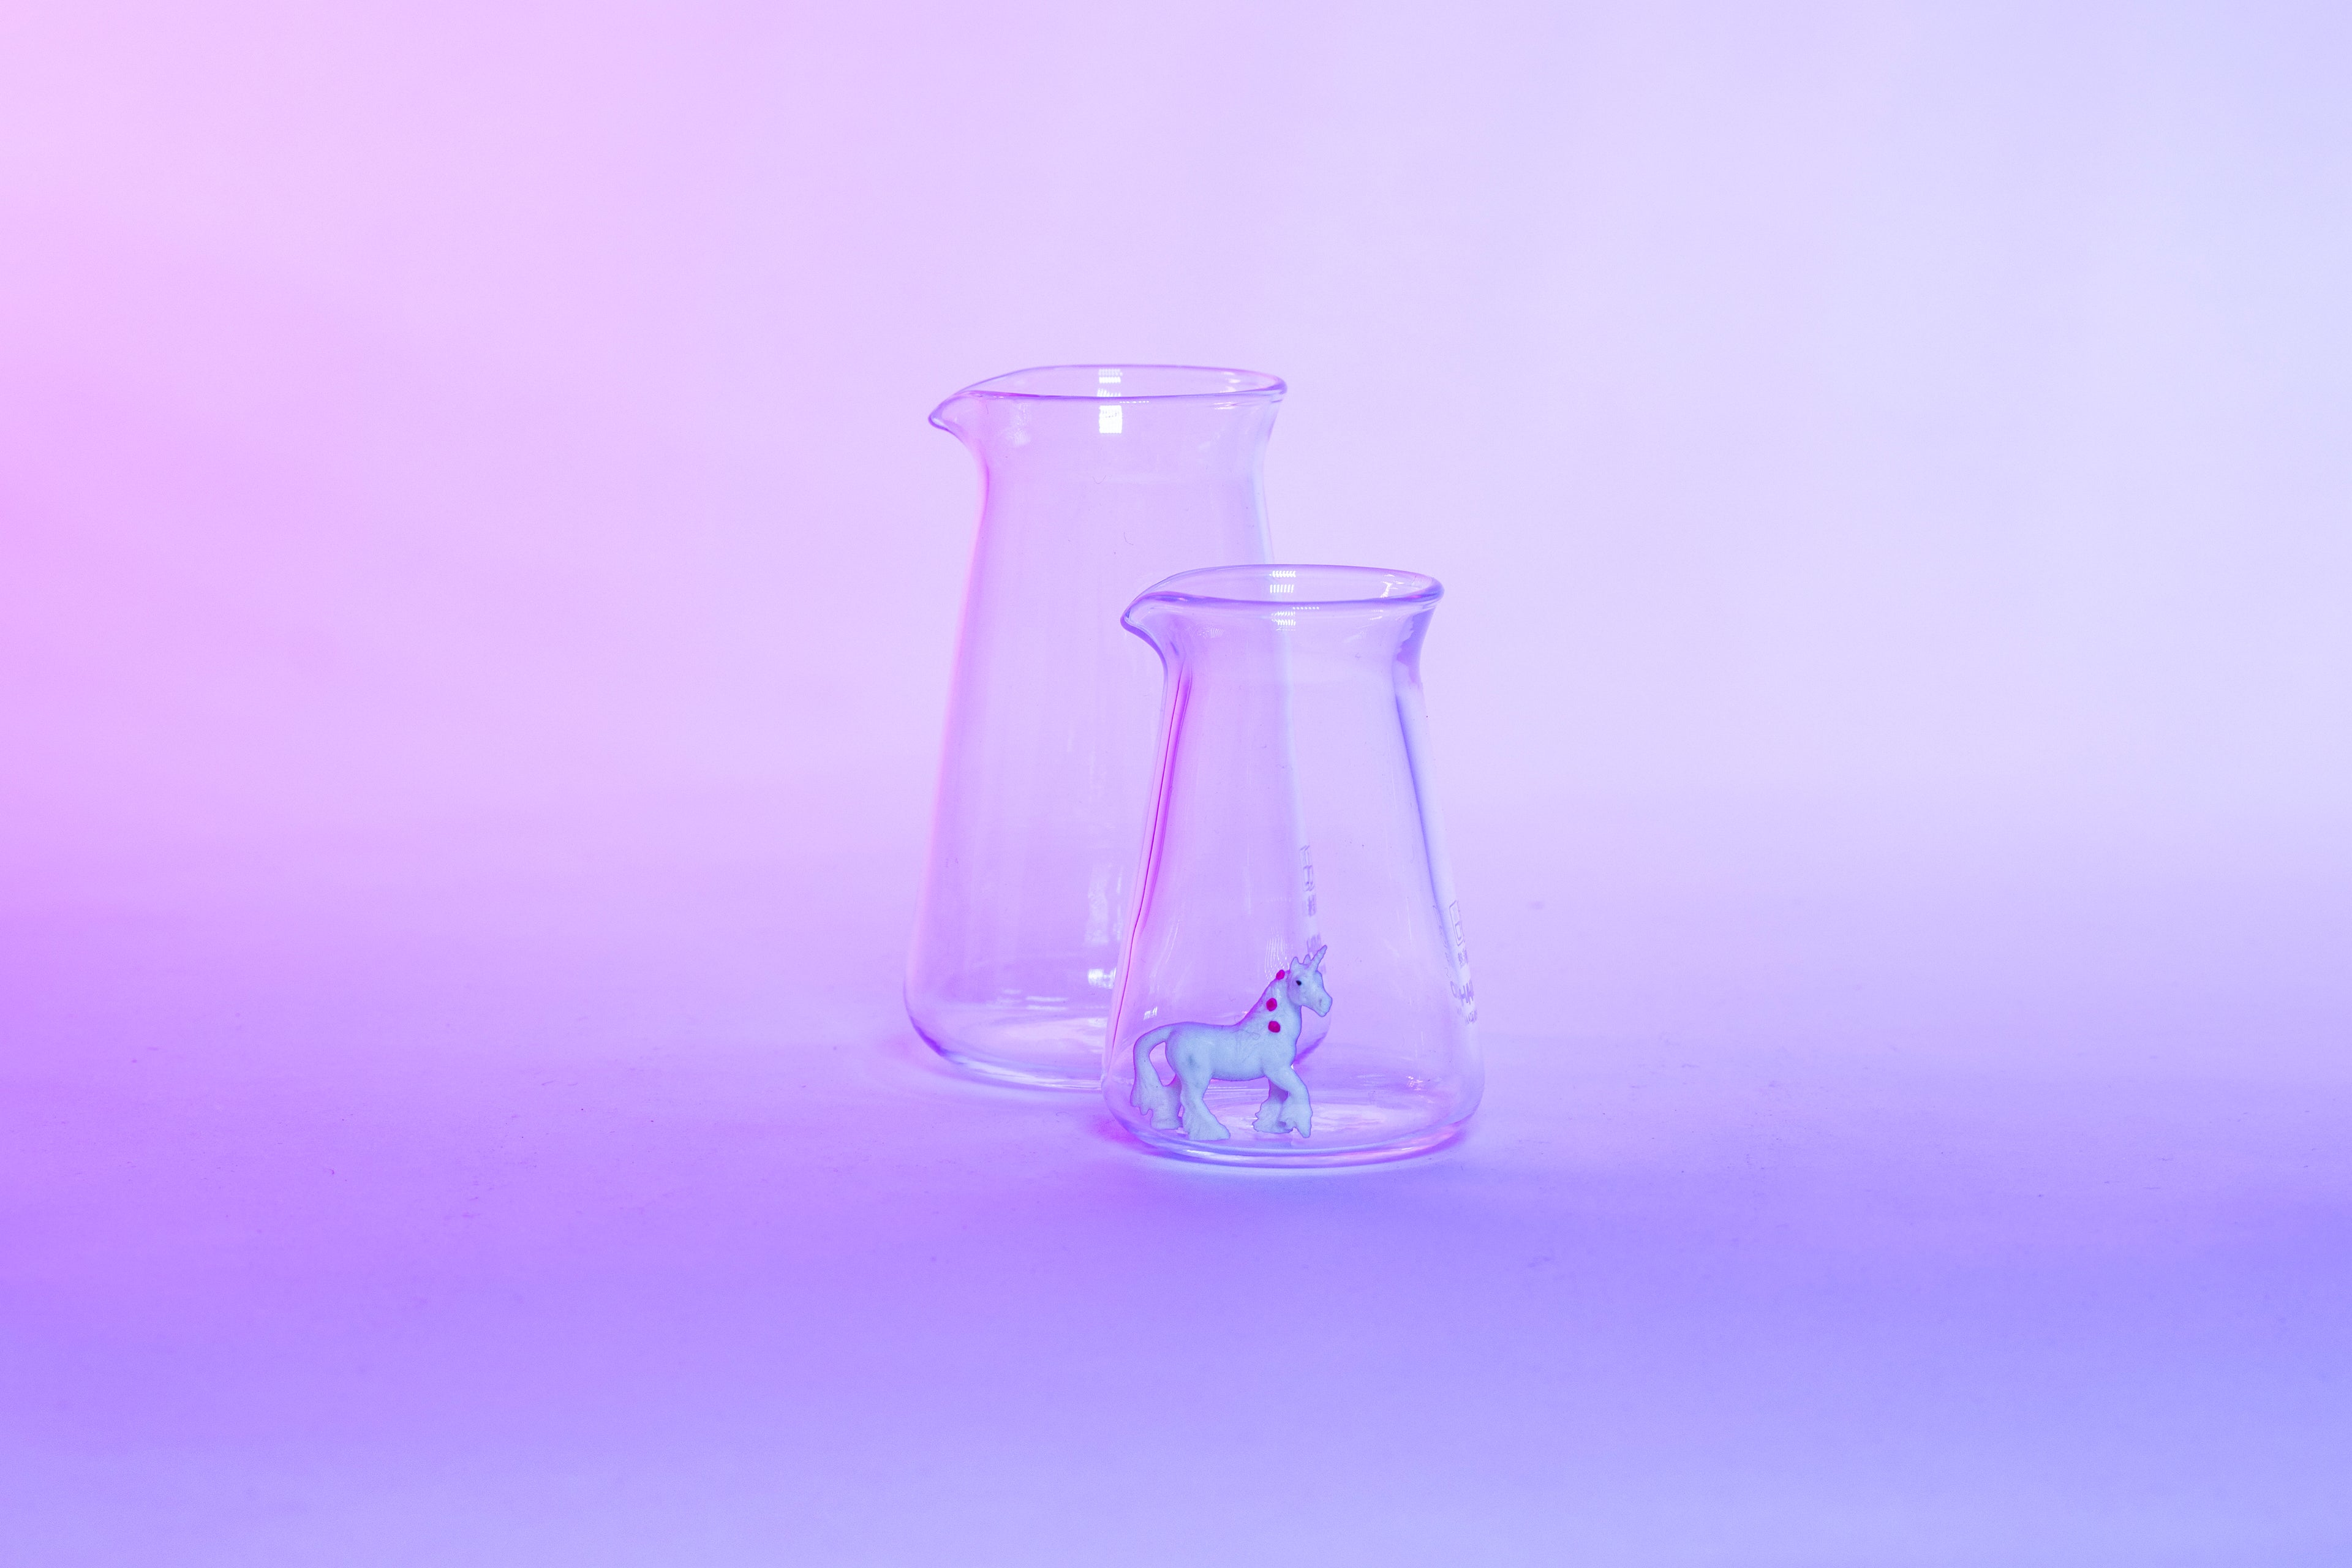 Two conical glass flask-shaped coffee pitchers, one big and one small, with a small white unicorn toy inside the small pitcher and set against a purple background.